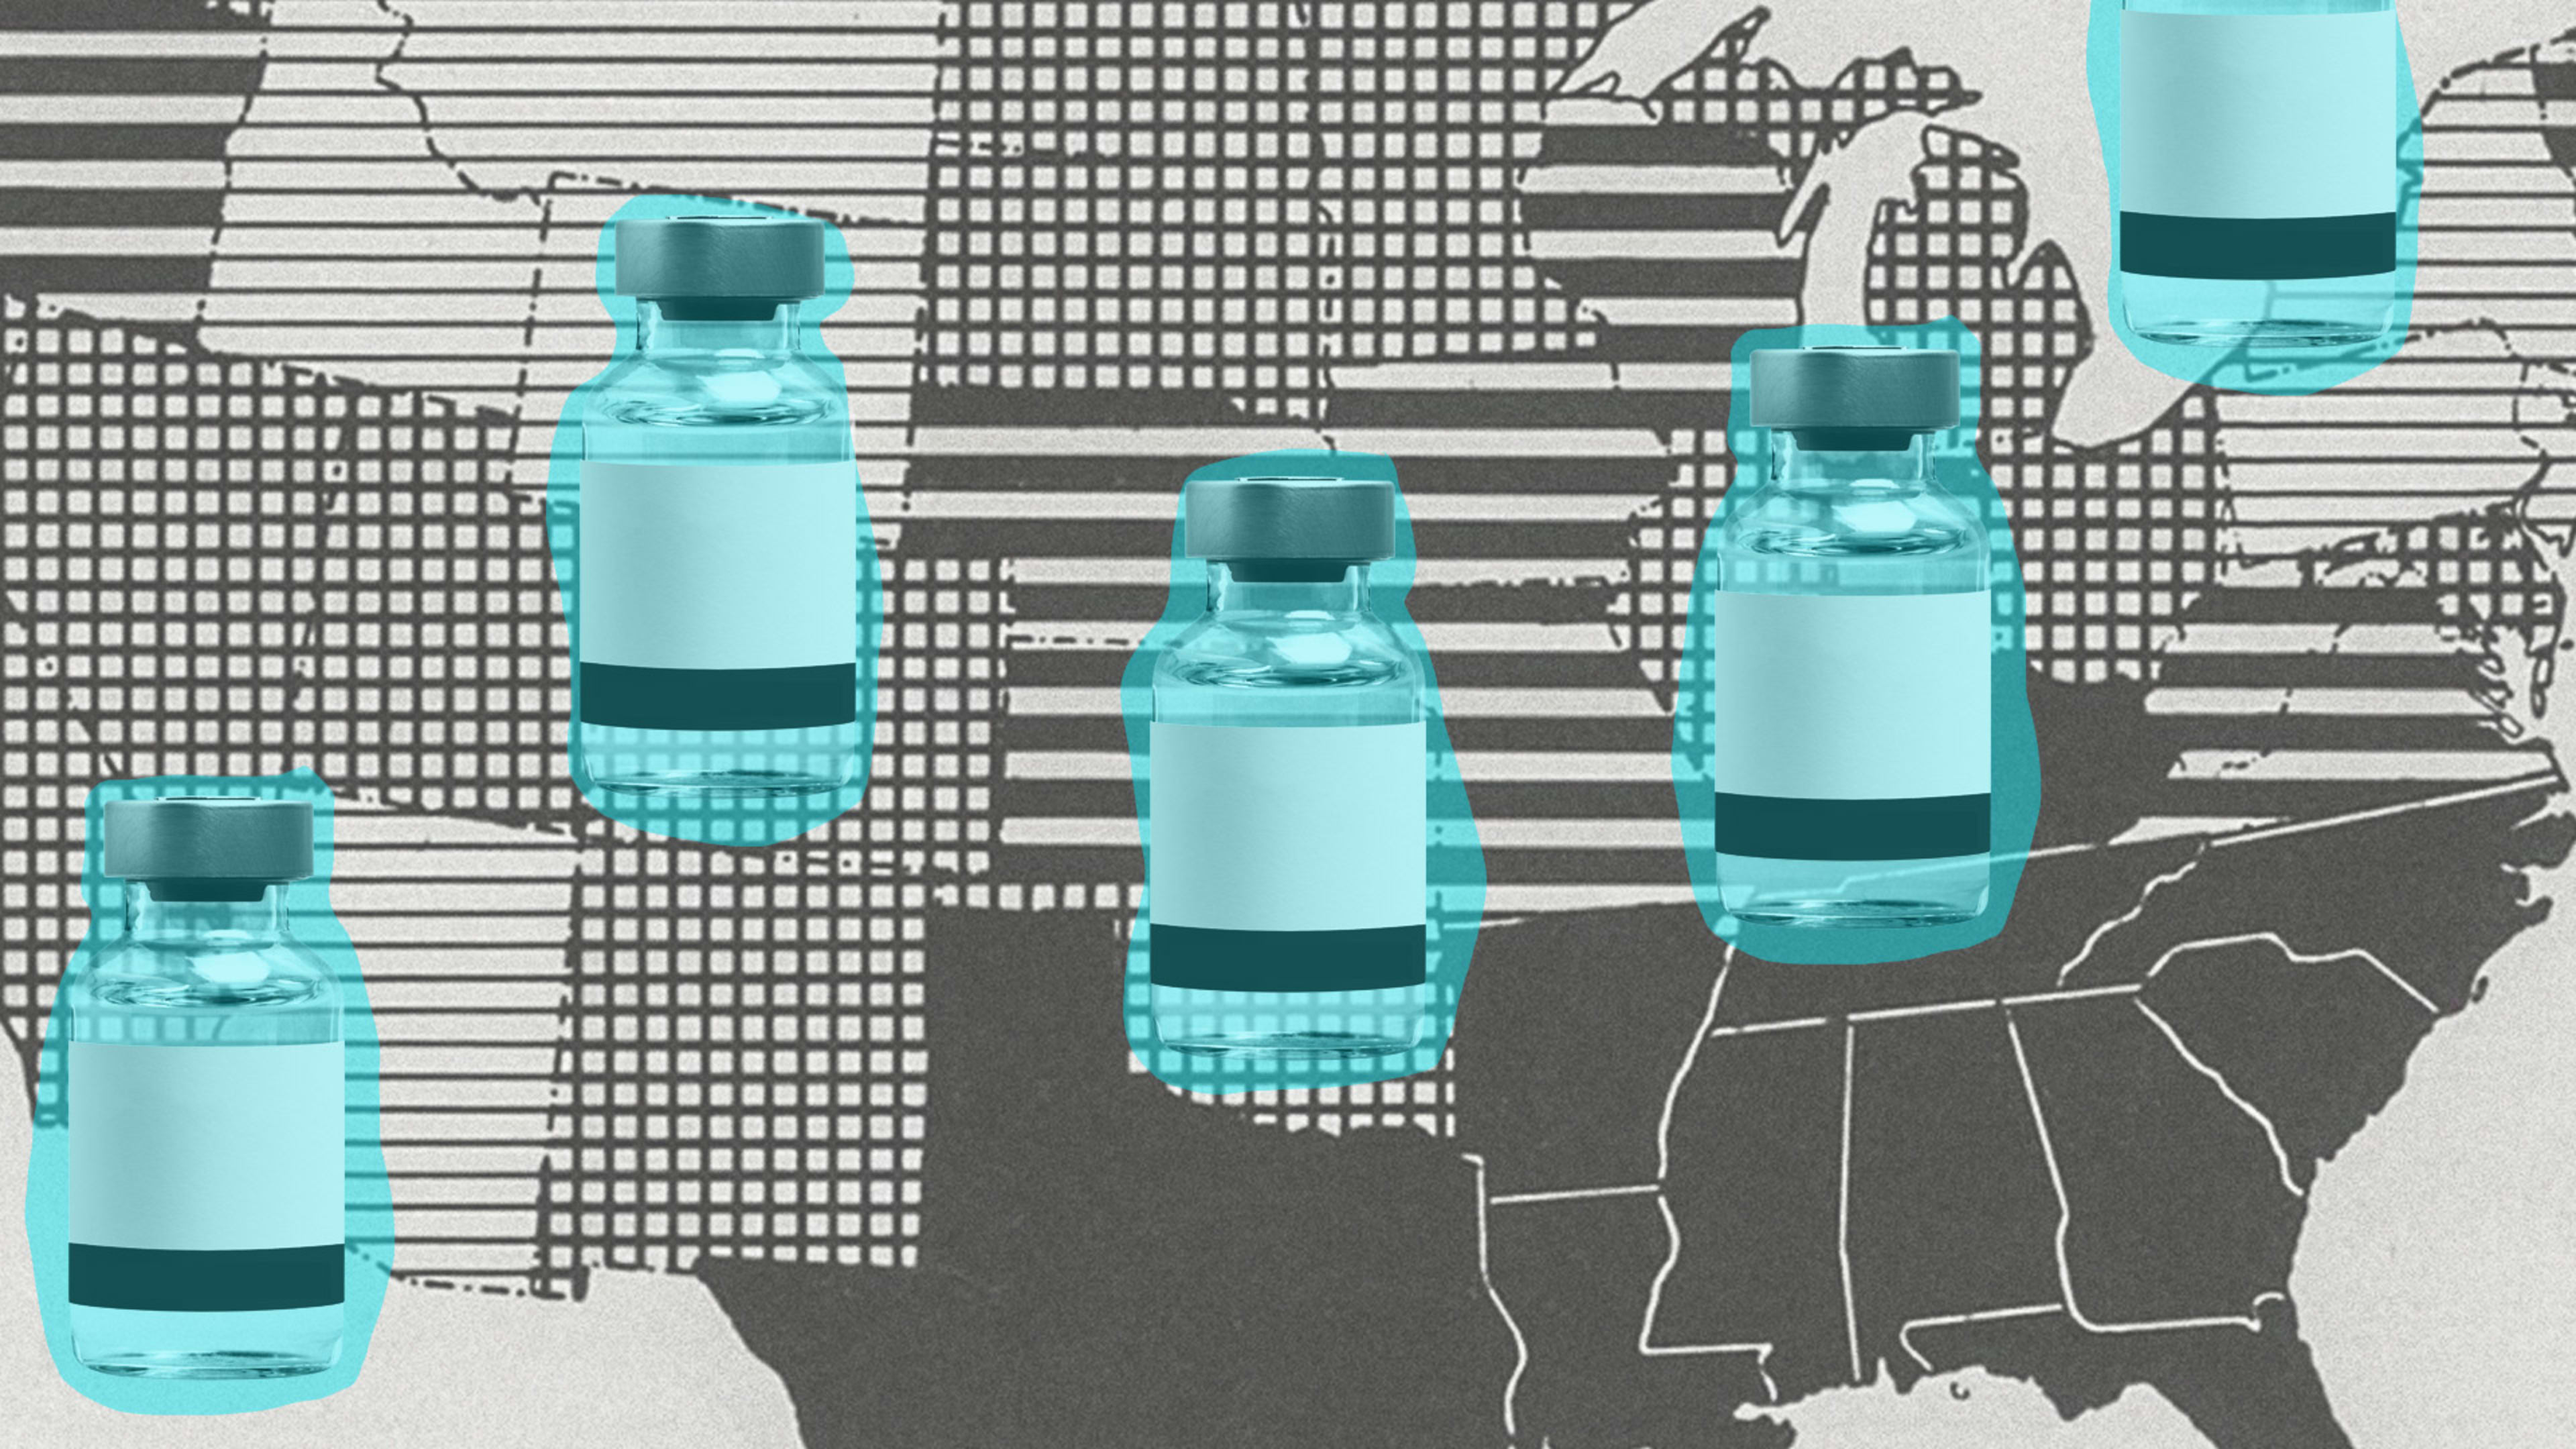 Delta variant update: This map shows the 5 most and least vaccinated states as U.S. cases rise